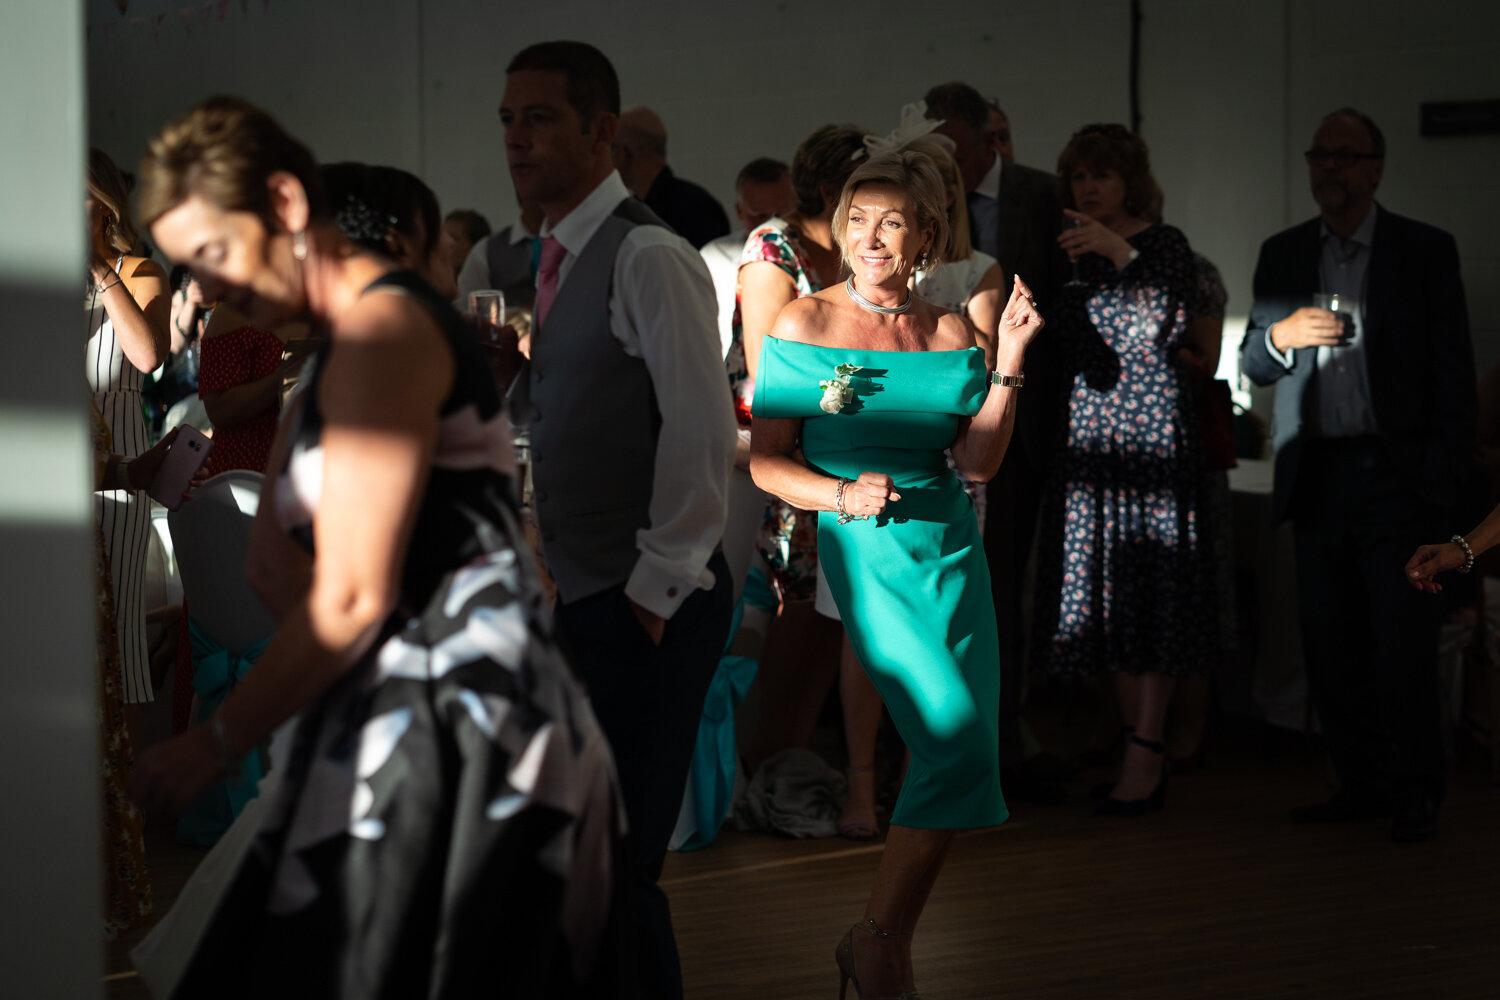 Wedding guests partying at a Royal Welsh Showground wedding